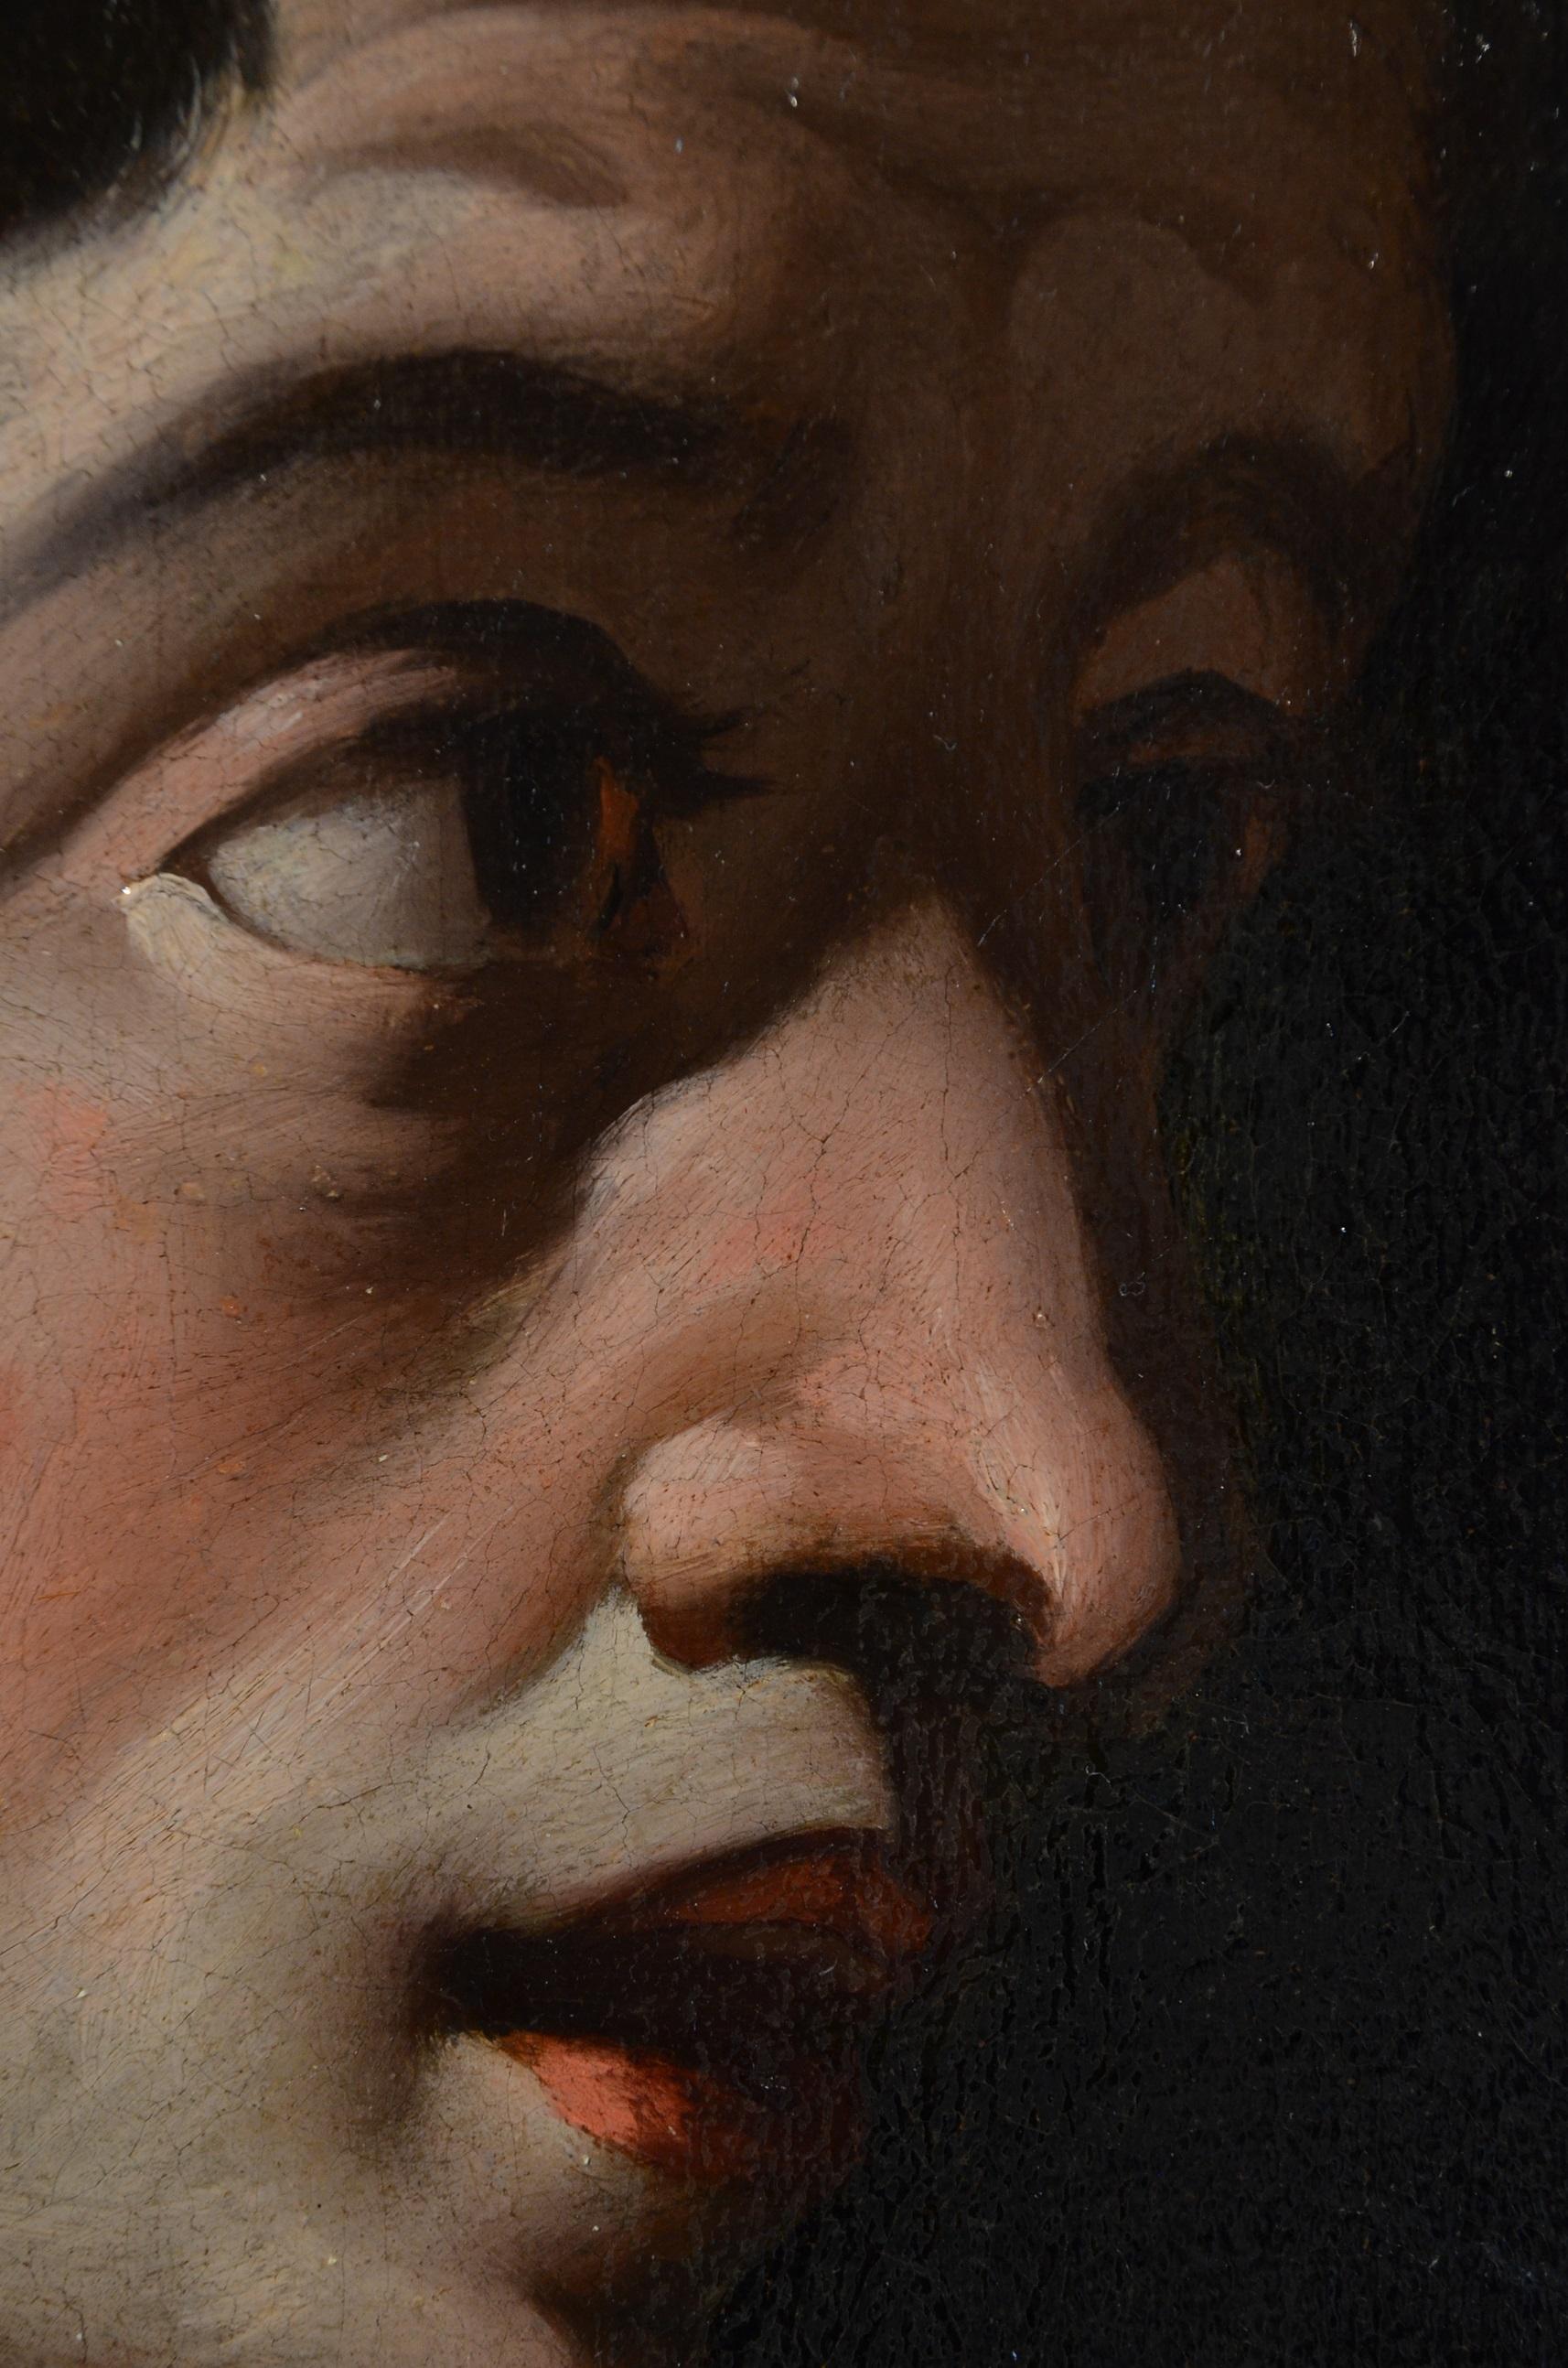 Study of a virile head (Tête de caractère)
Nordic Caravaggesque of the 17th century (Utrecht School)

Oil painting on canvas
41 x 35 cm.
In gilded frame 51 x 45 cm.

The fascinating painting proposed here depicts the study of a virile face,